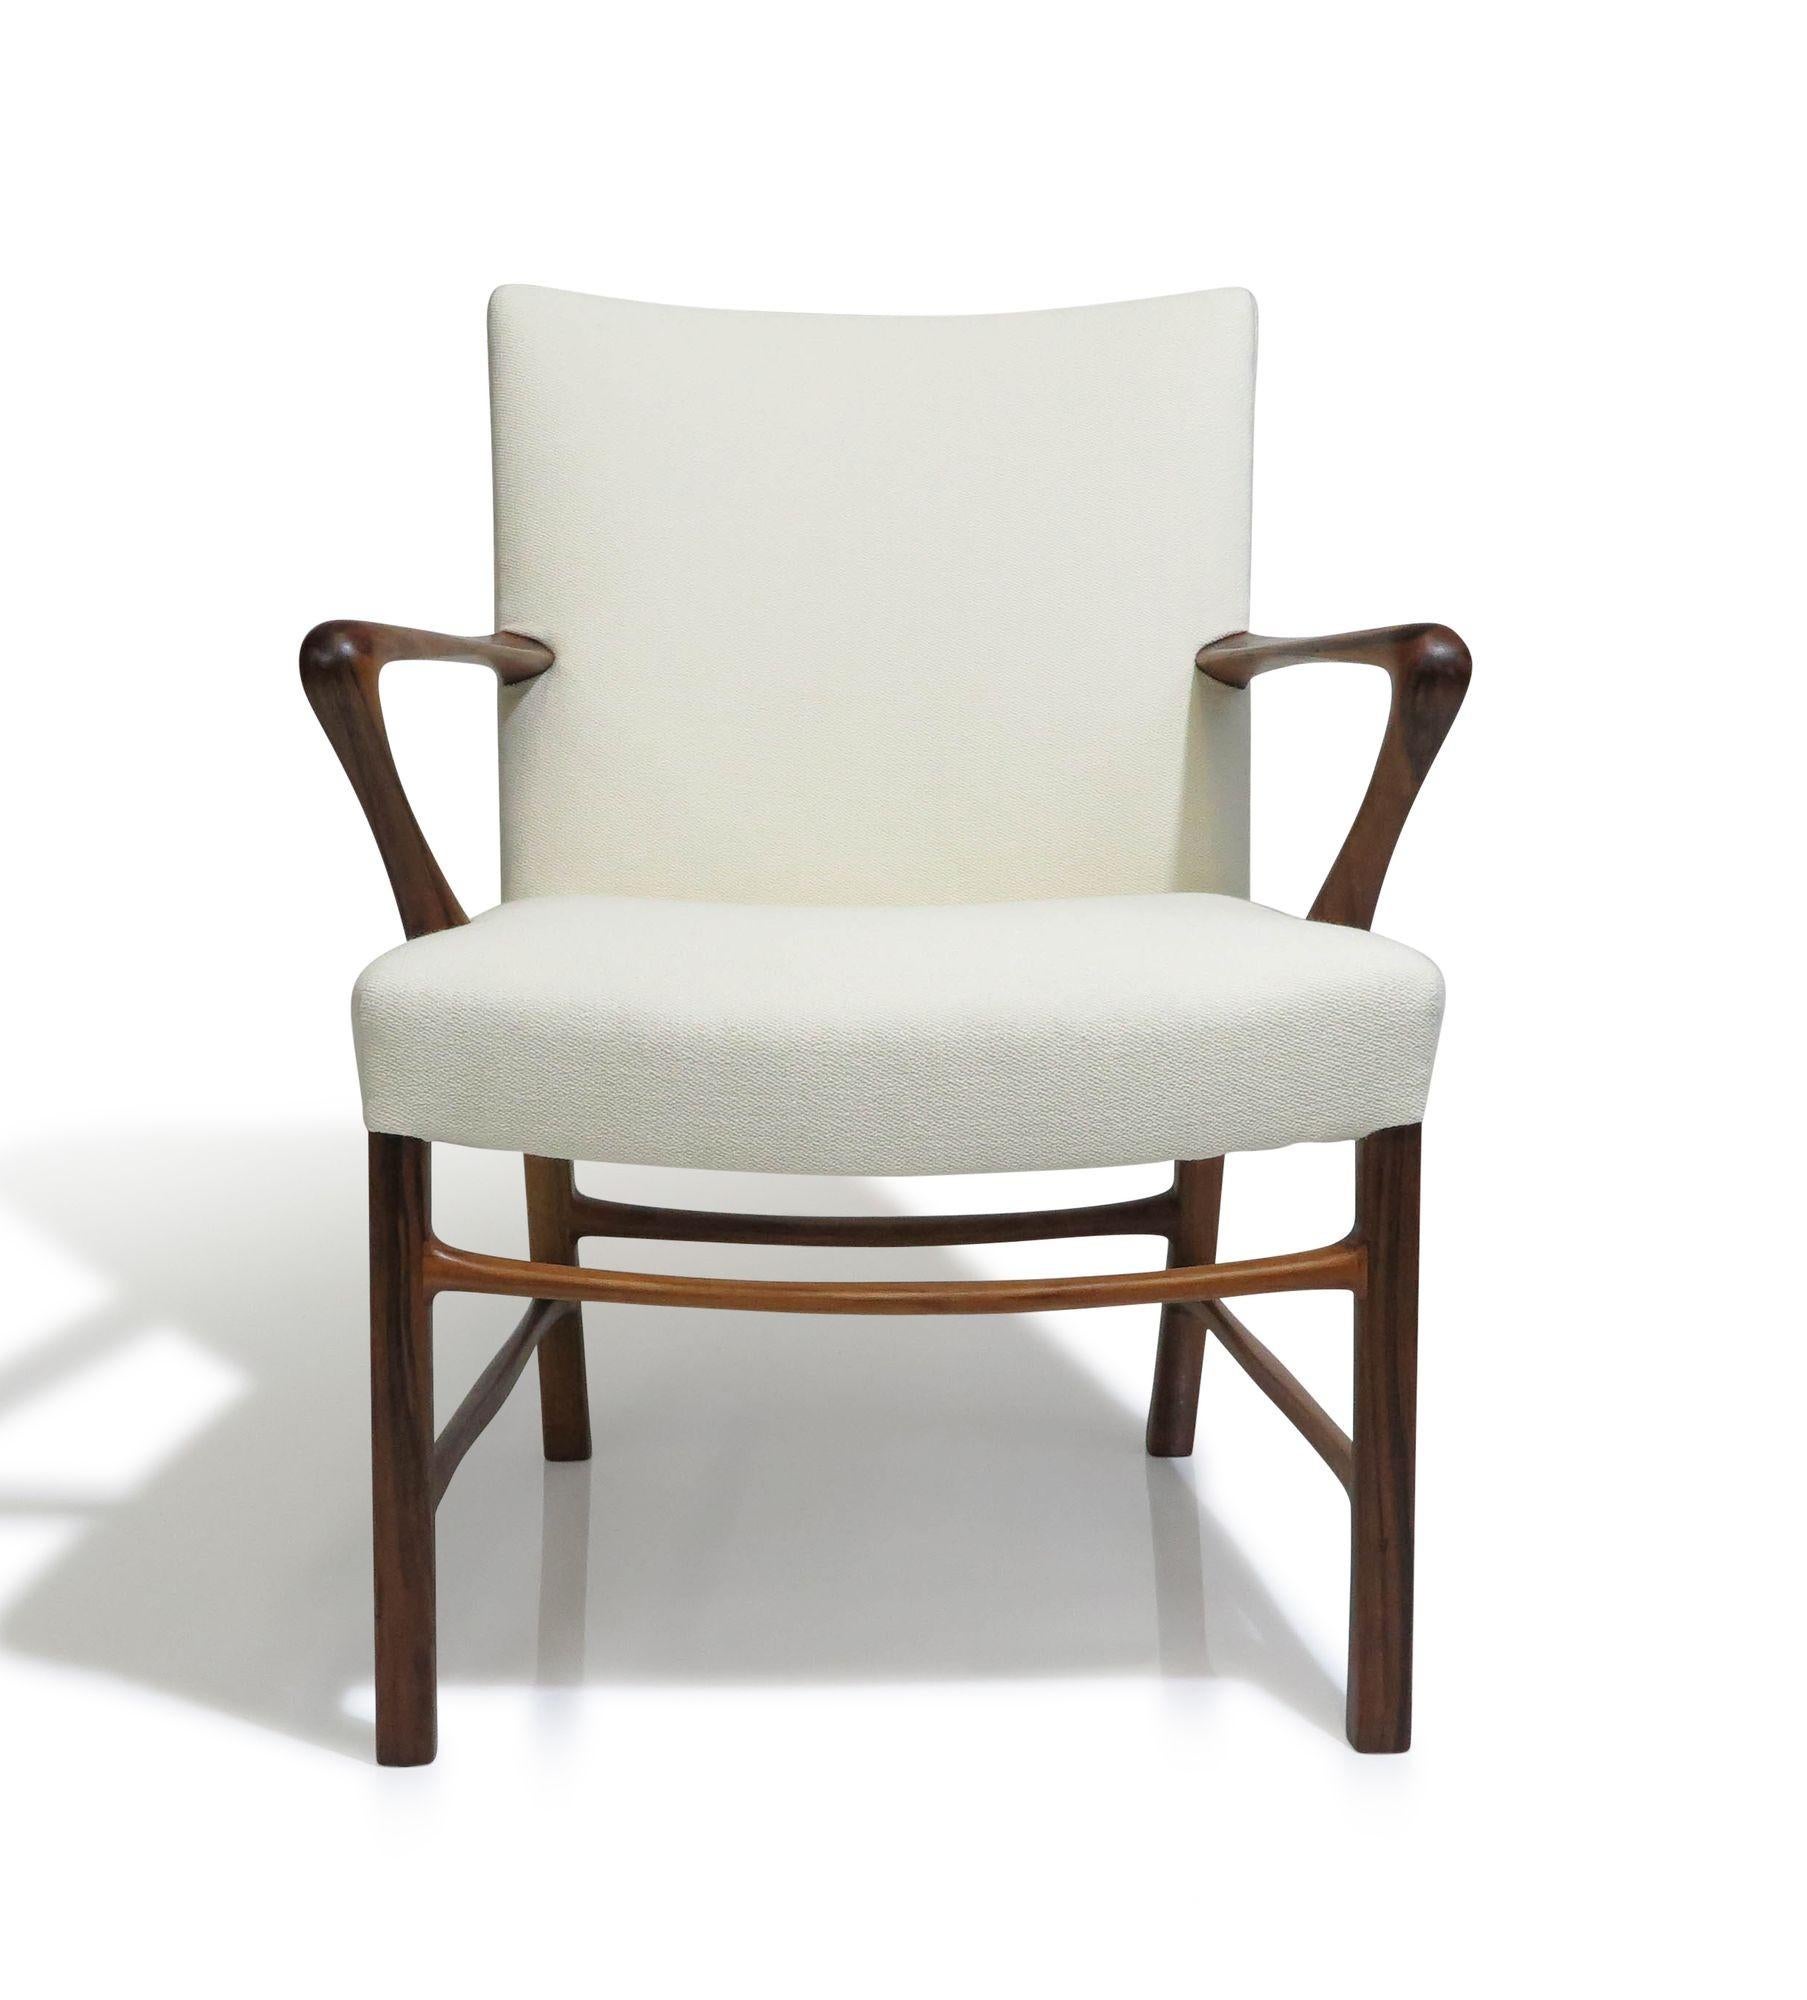 Finely sculpted armchair in rosewood, designed by Danish modernist architect Palle Suenson for Jacob Kjaer, c.1940, Denmark. The chair showcases elegantly curved arms and cross stretchers made of rosewood. It has been newly upholstered in